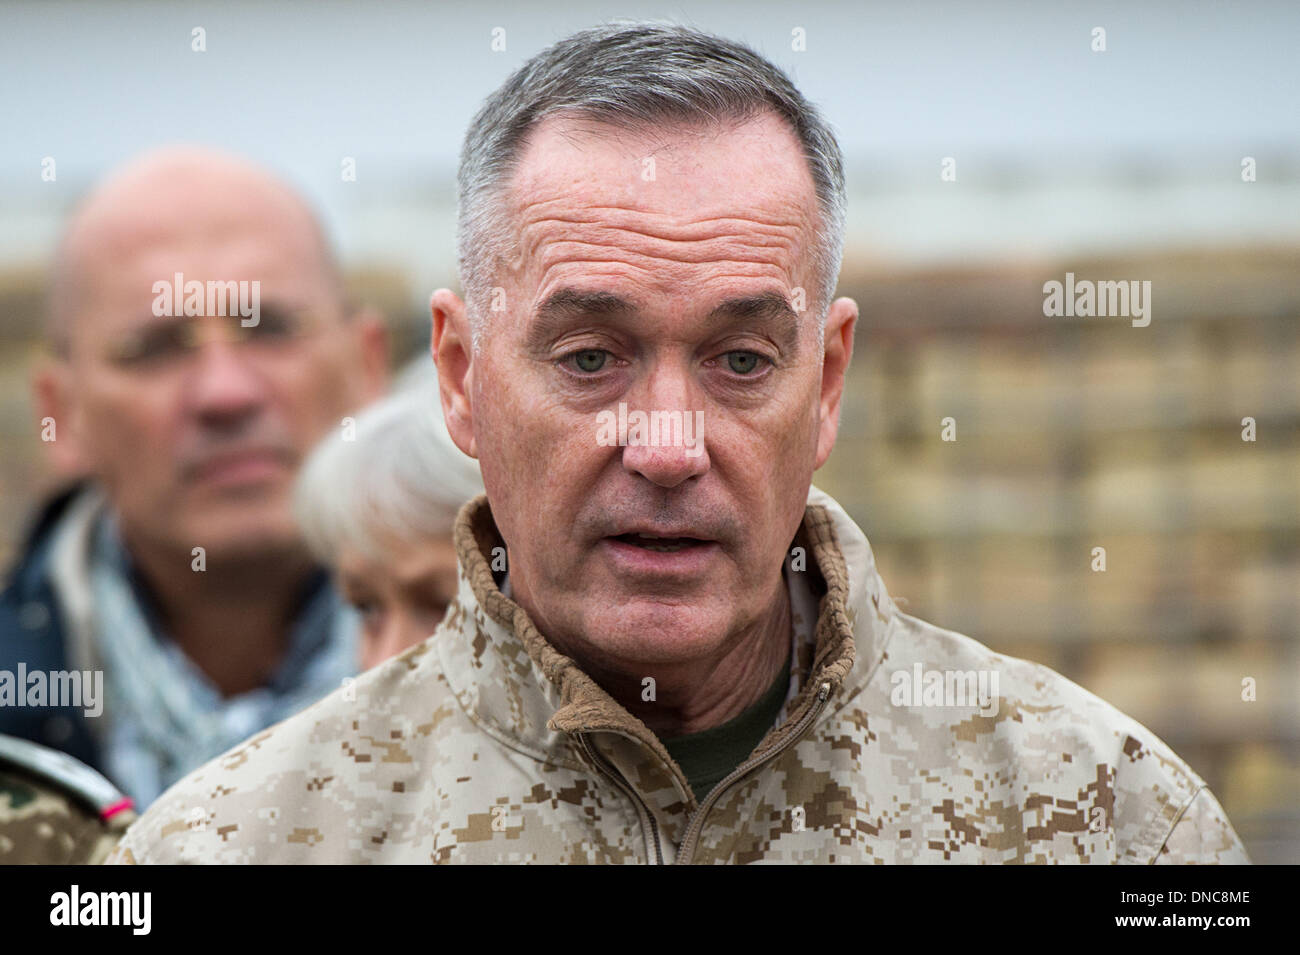 Masar-e Sharif, Afghanistan. 22nd Dec, 2013. US General Joseph Dunford, Supreme Commander of the ISAF troops in Afghanistan, speaks at Camp Marmal in Masar-e Sharif, Afghanistan, 22 December 2013. Photo: Maurizio Gambarini/dpa/Alamy Live News Stock Photo